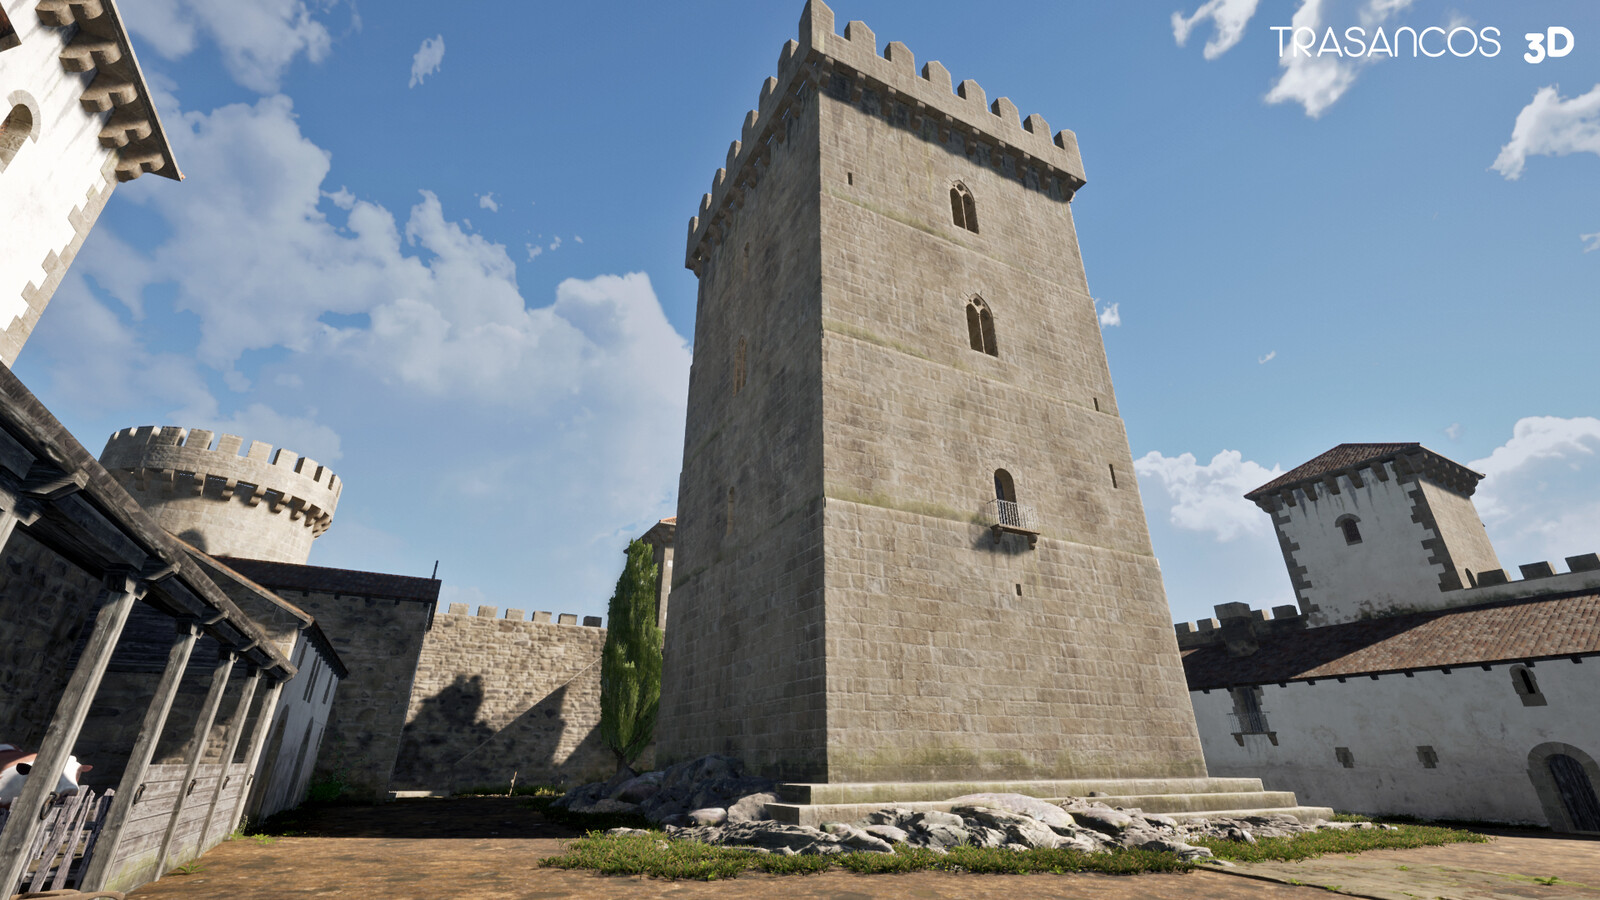 Rocha Forte castle. Final rendering view of the main tower.